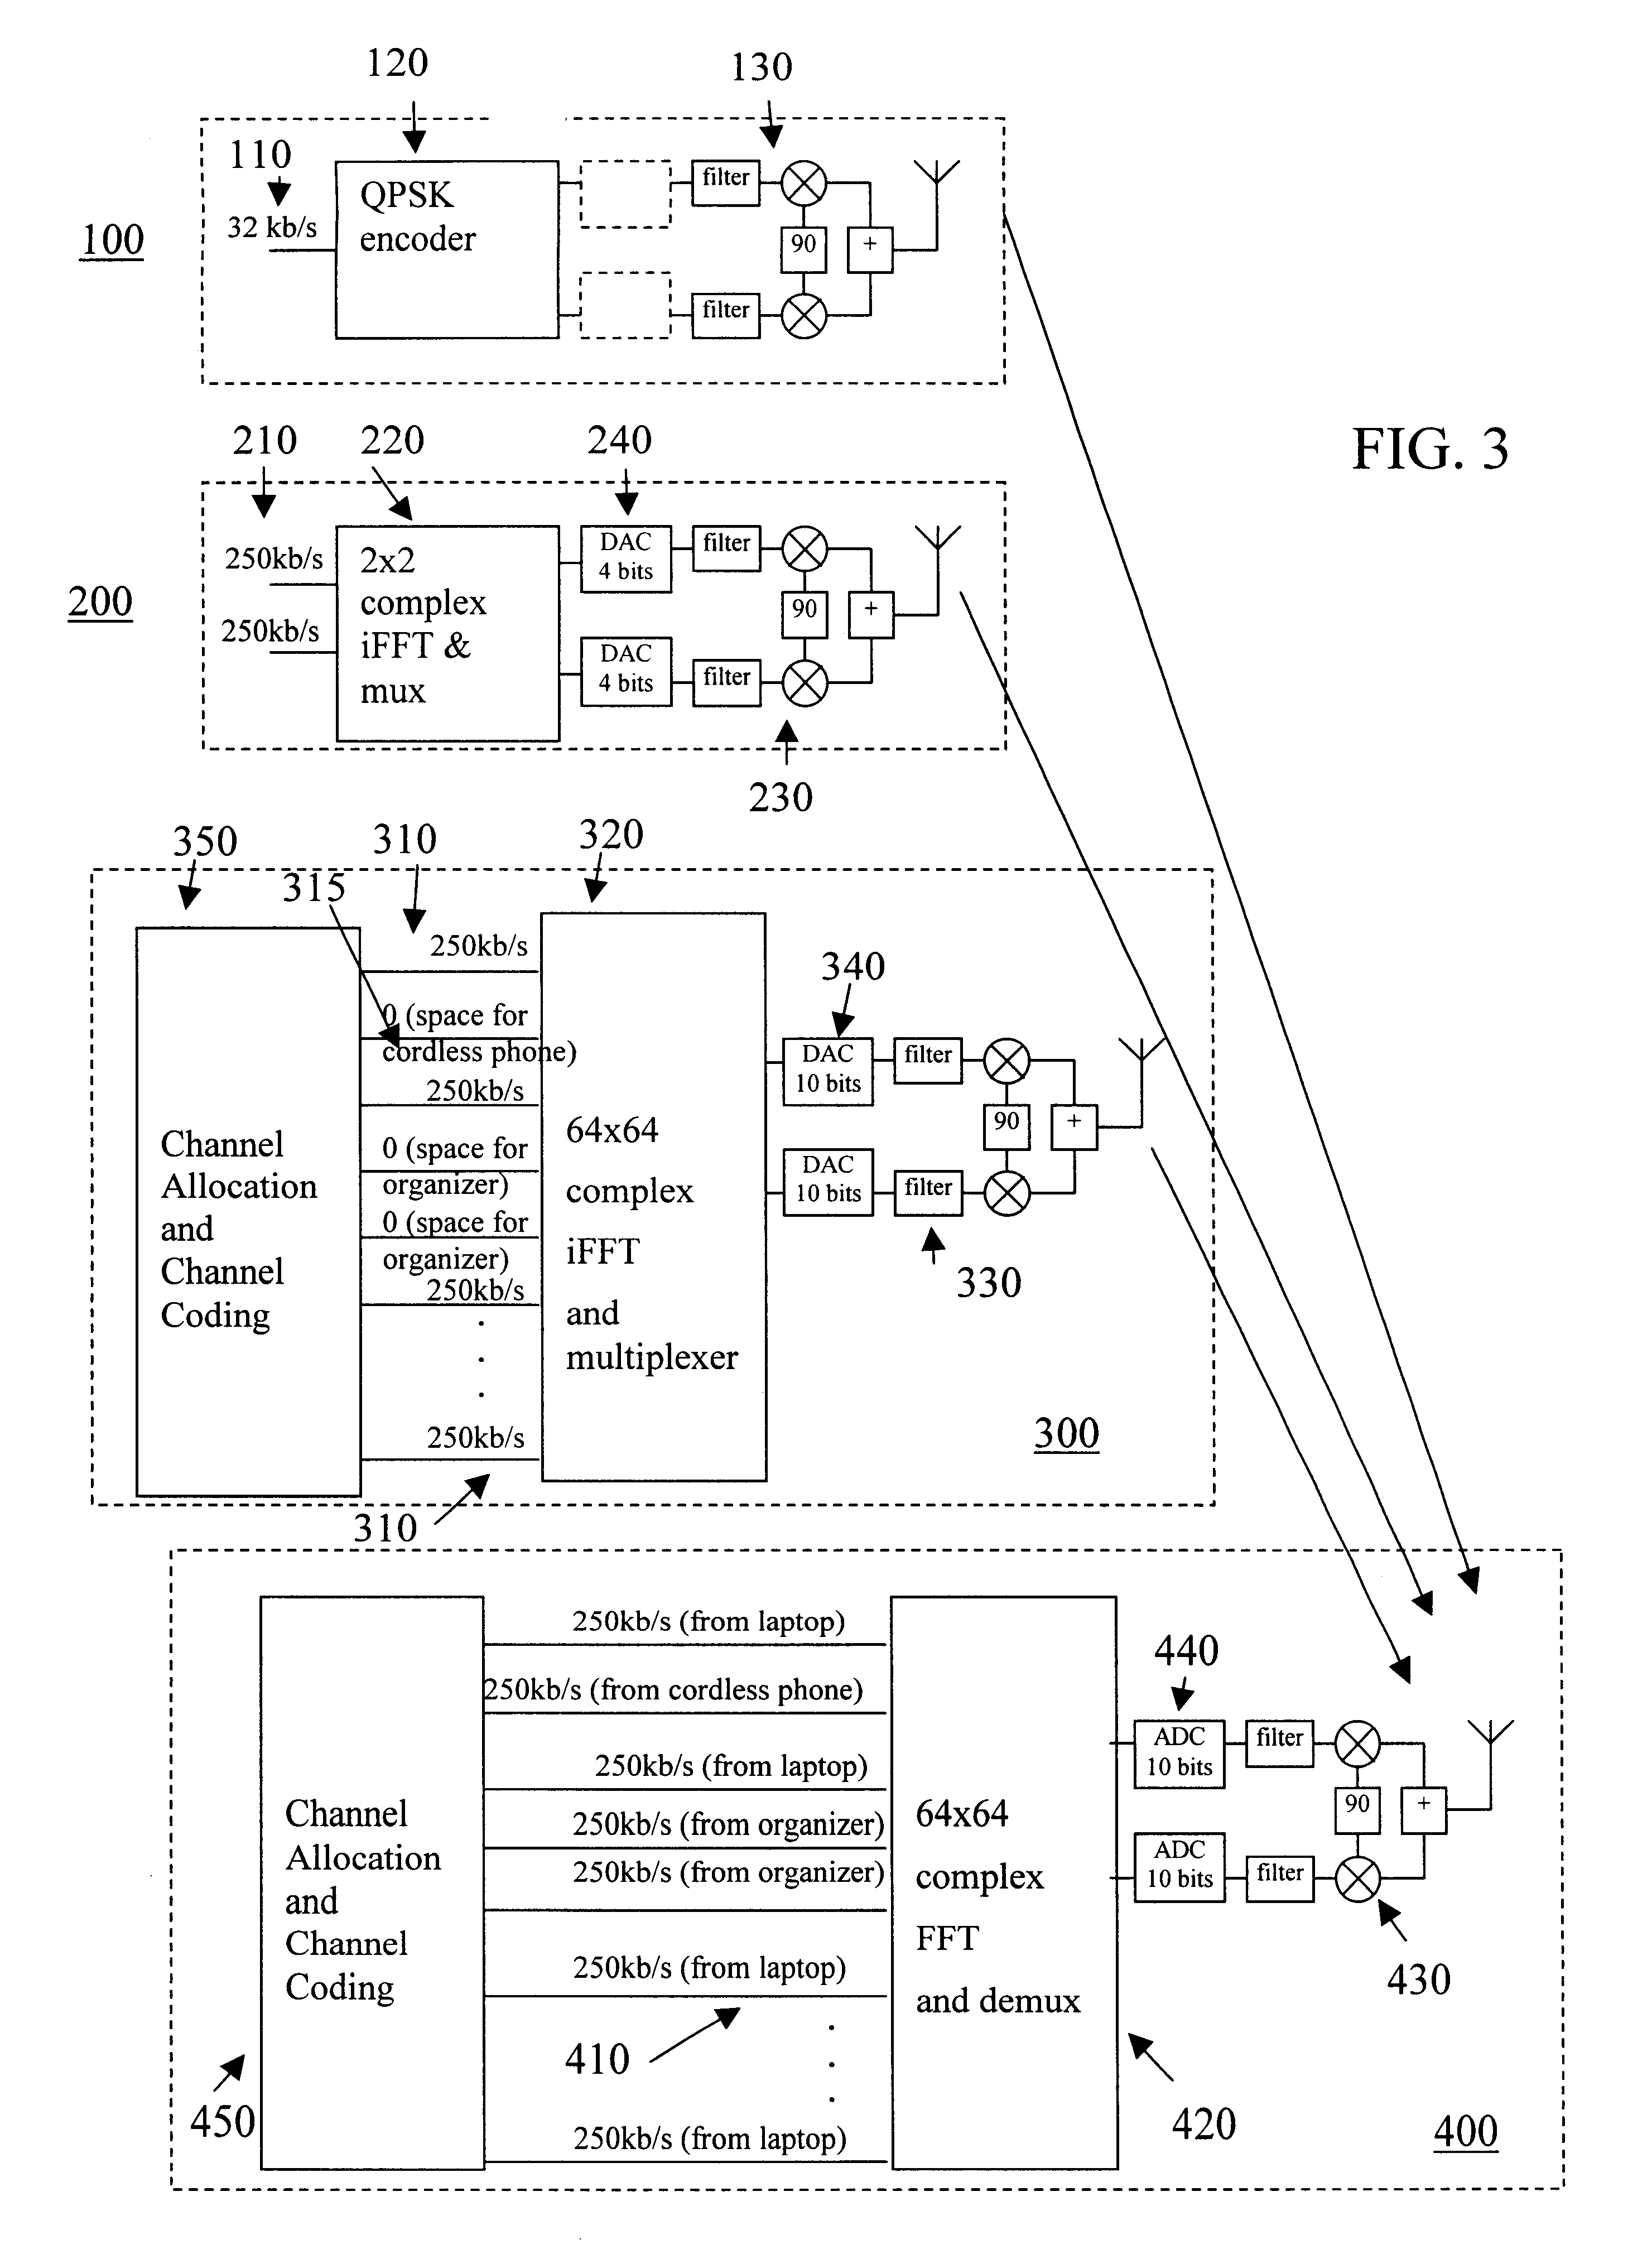 Protocols for scalable communication system using overland signals and multi-carrier frequency communication